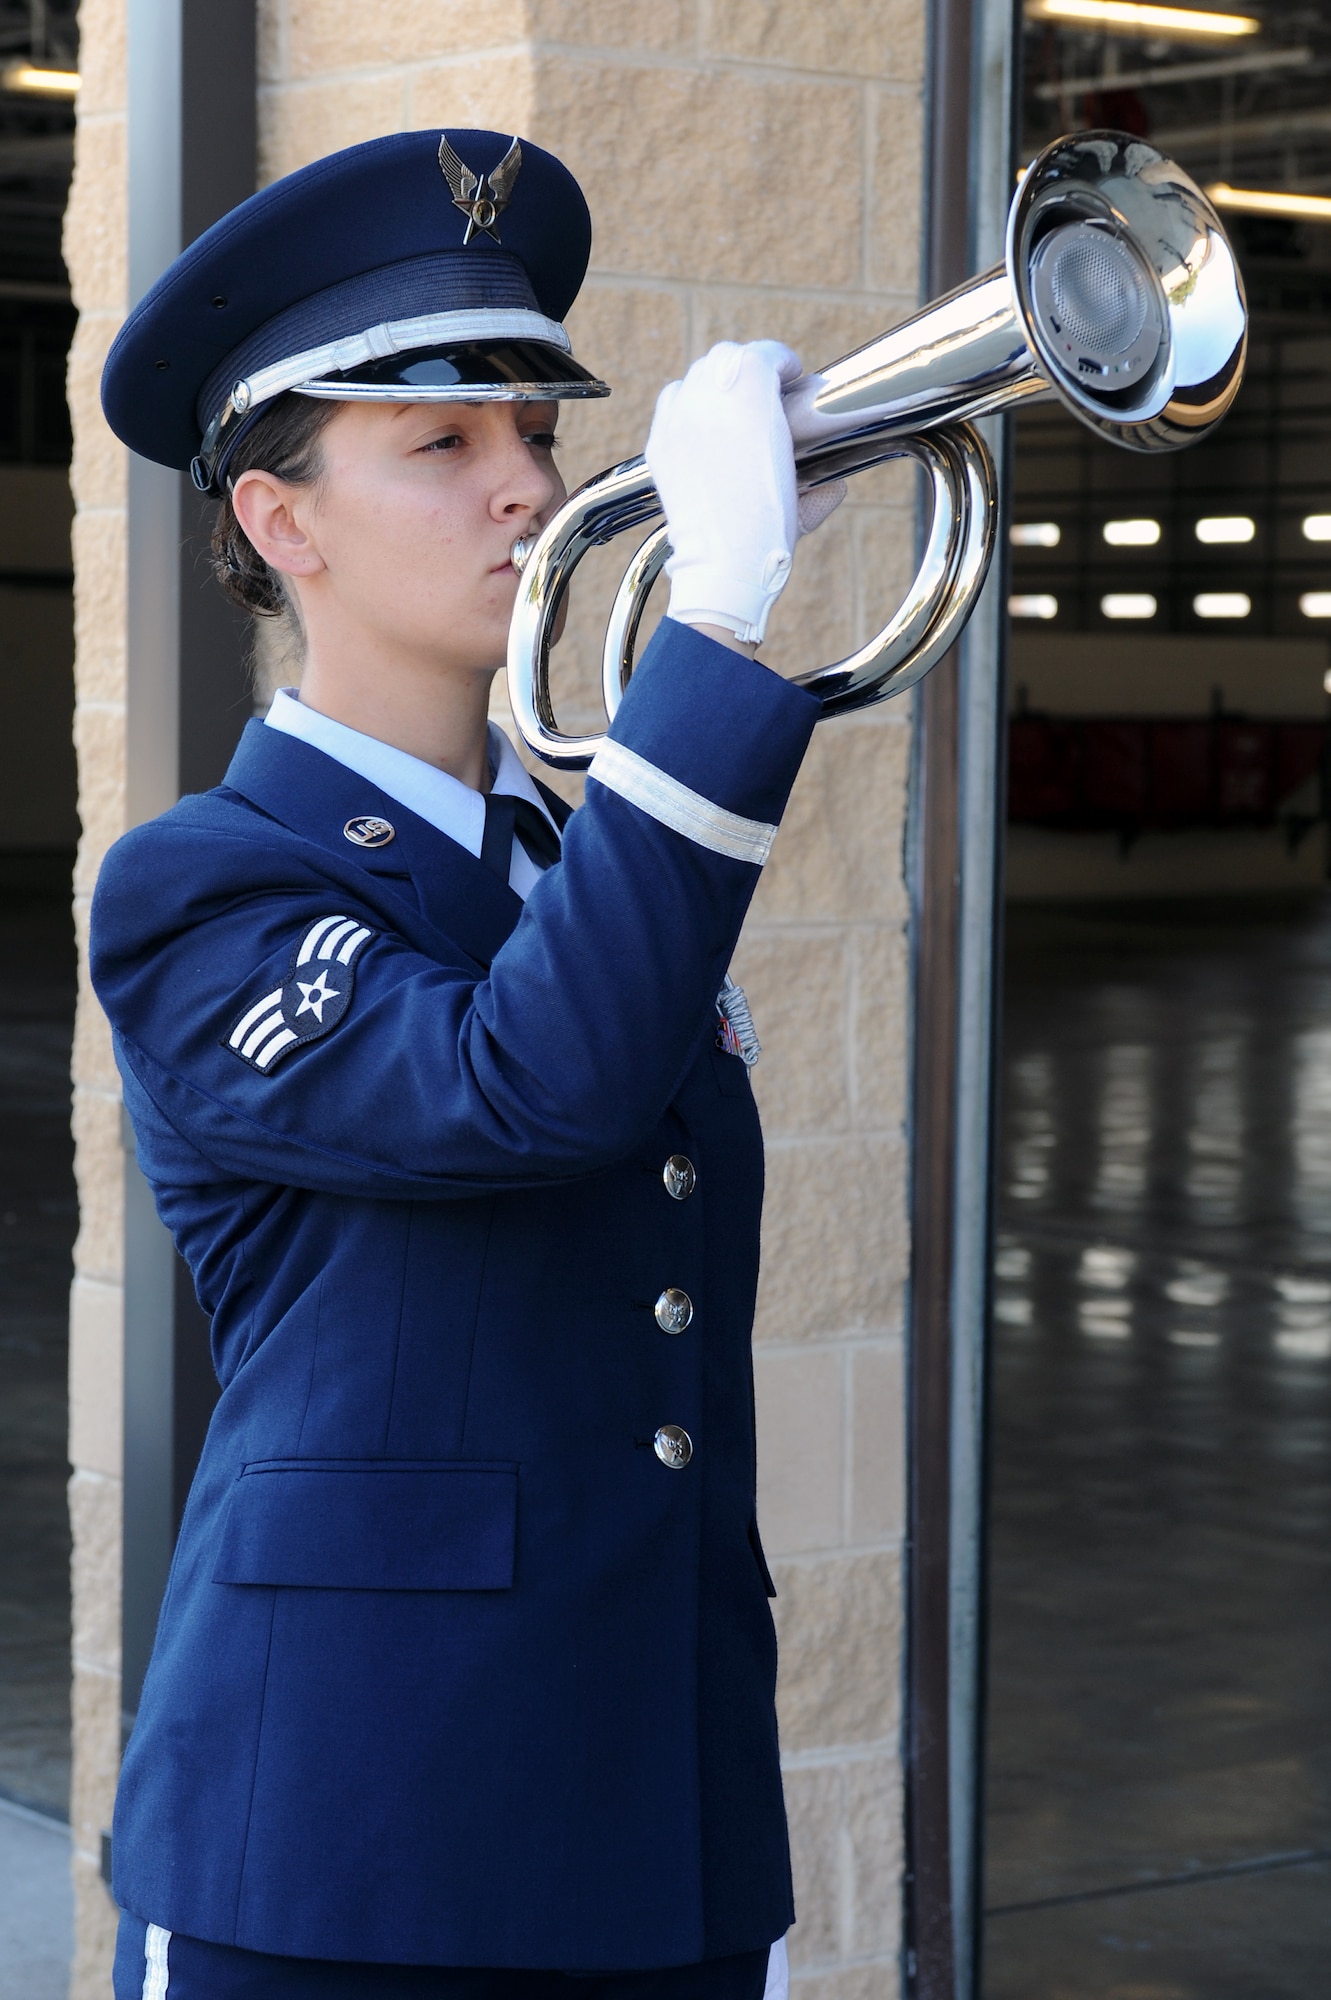 U.S. Air Force Senior Airman Melissa Wallace sounds TAPS during the 9/11 Remembrance Ceremony on Seymour Johnson Air Force Base, N.C., Sept. 11, 2012. The hour-long ceremony included a color guard consisting of firemen and defenders, a slide show documenting the terrorist attacks, four guest speakers and a 21-gun salute by 4th Fighter Wing Base Honor Guard Airmen. (U.S. Air Force photo/Airman 1st Class John Nieves Camacho/Released)